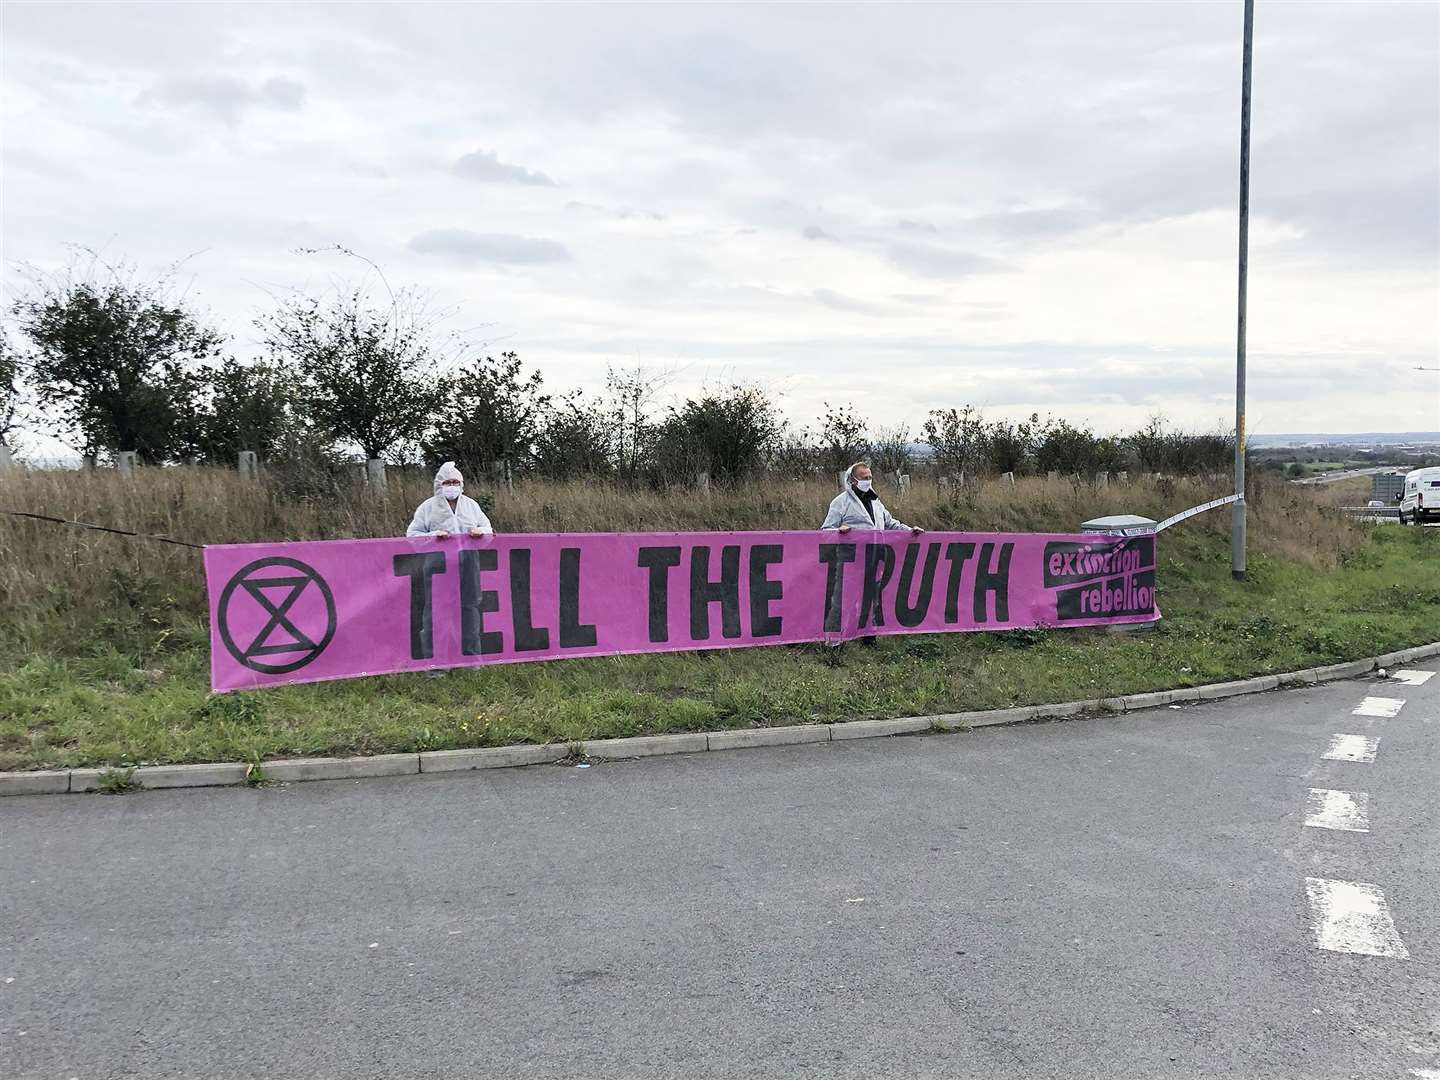 XR Thanet gathered at three road side locations to spread their message